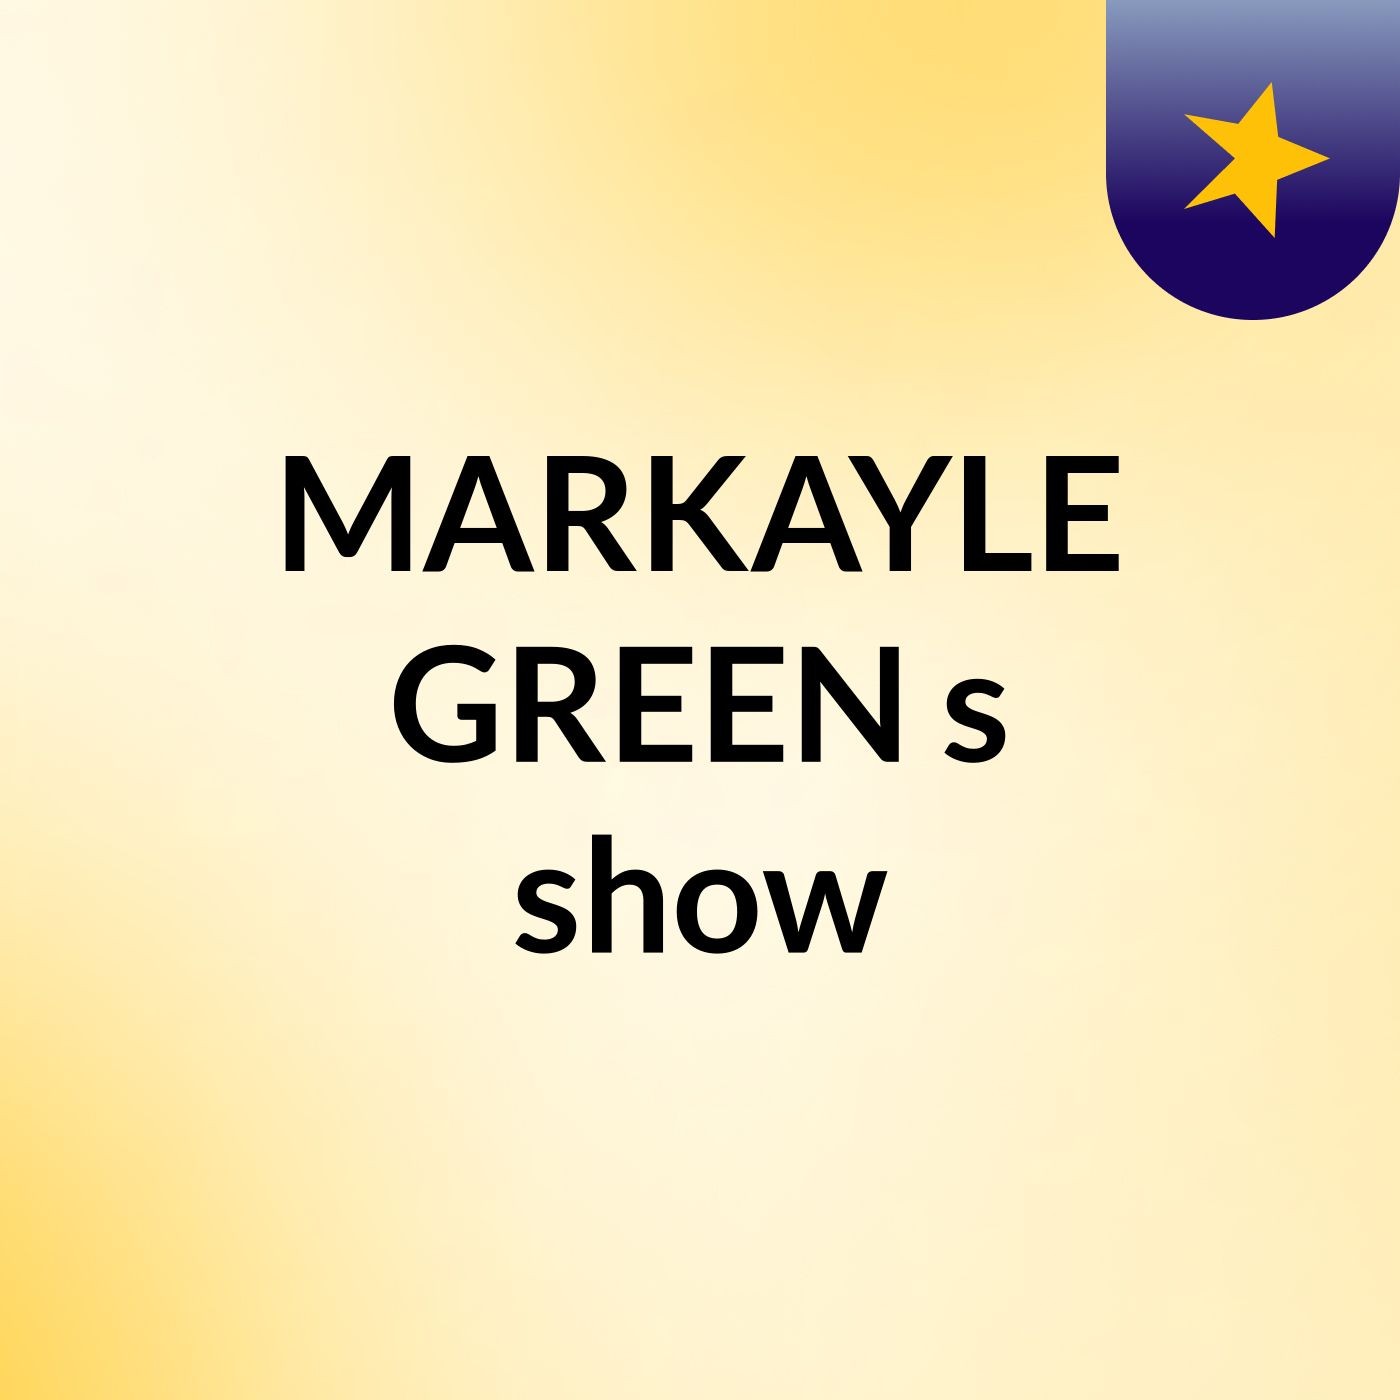 MARKAYLE GREEN's show